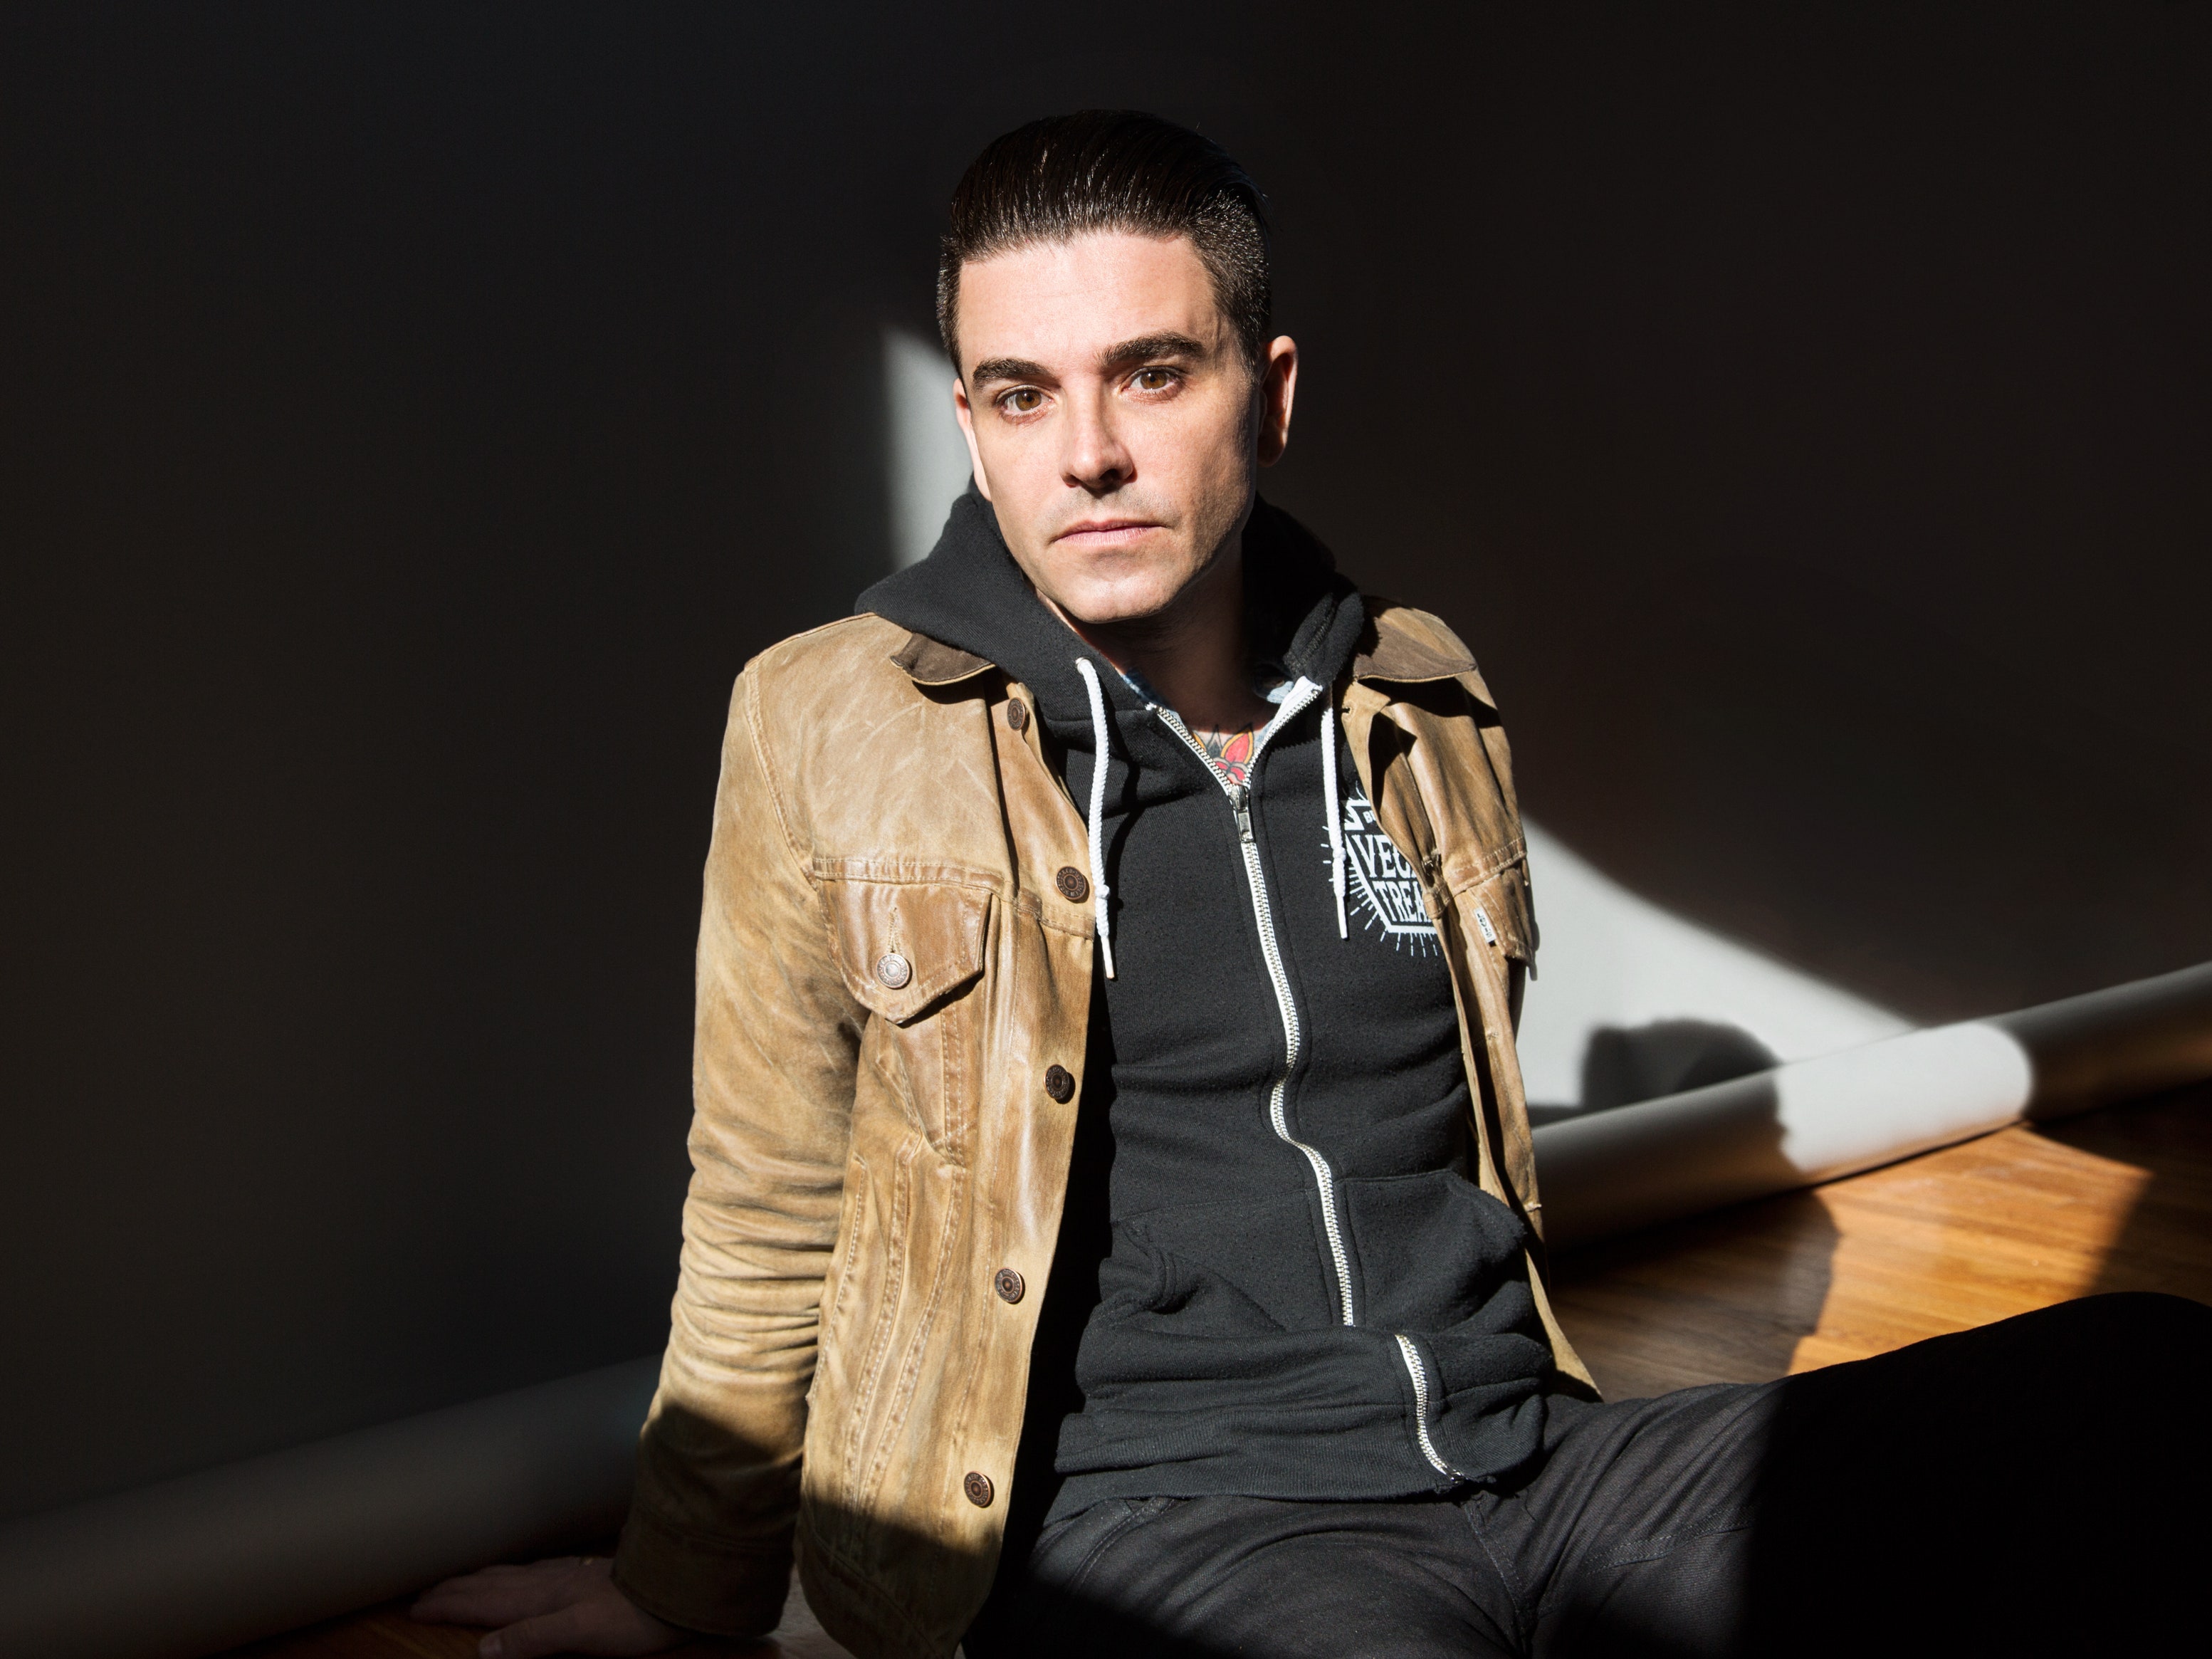 Dashboard Confessional's Chris Carrabba Reckons with the Legacy of Emo